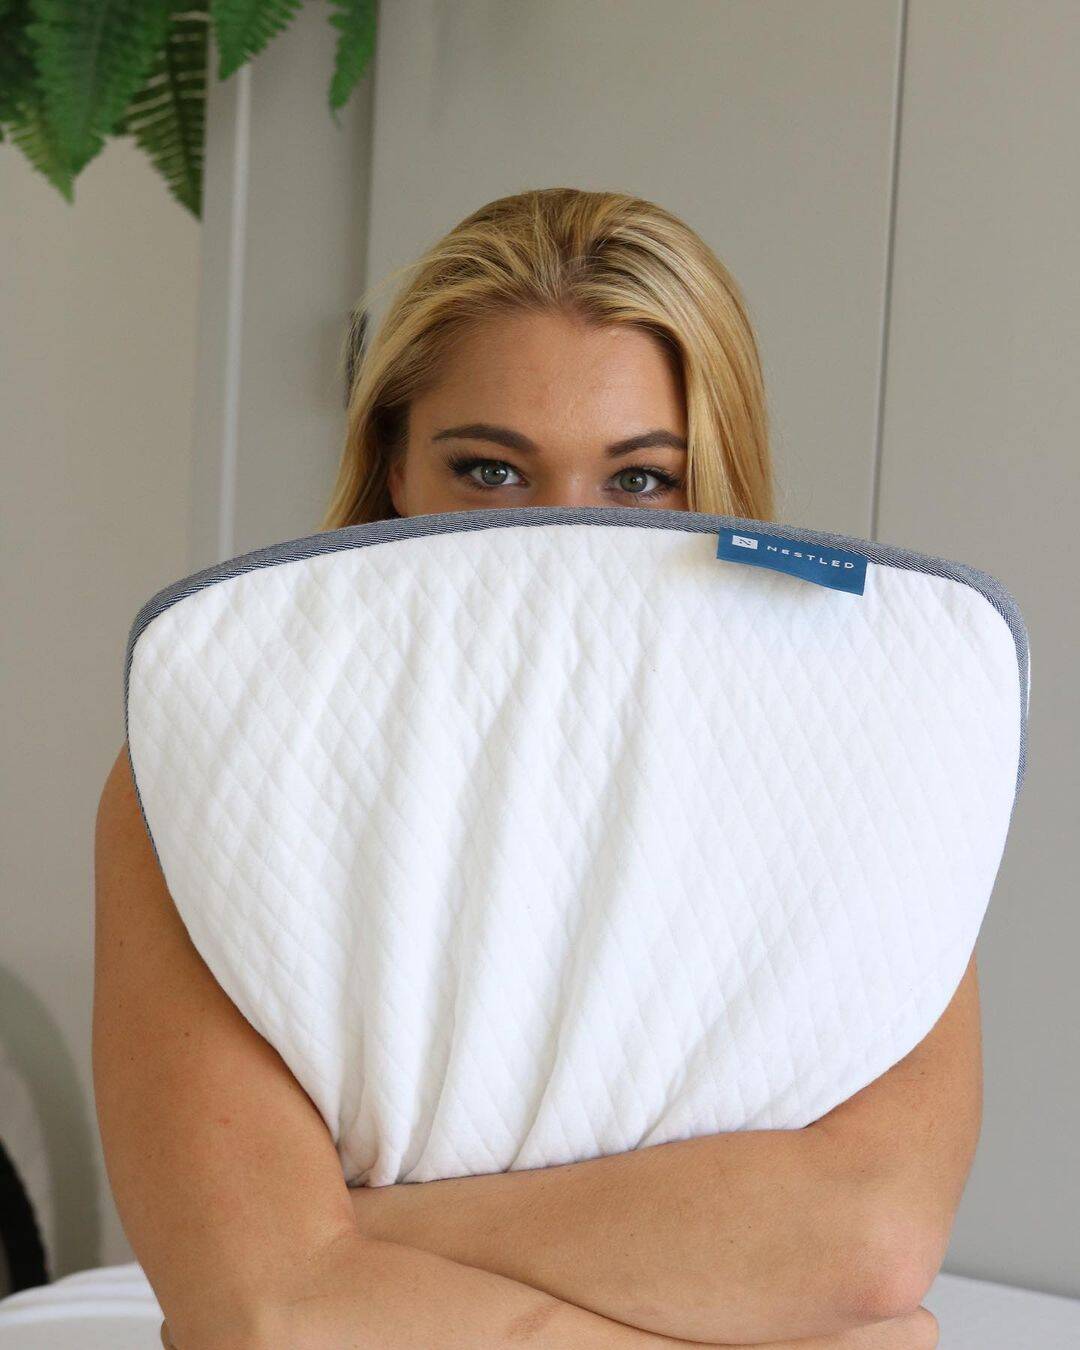 A woman holds an eco-friendly pillow in front of her face.